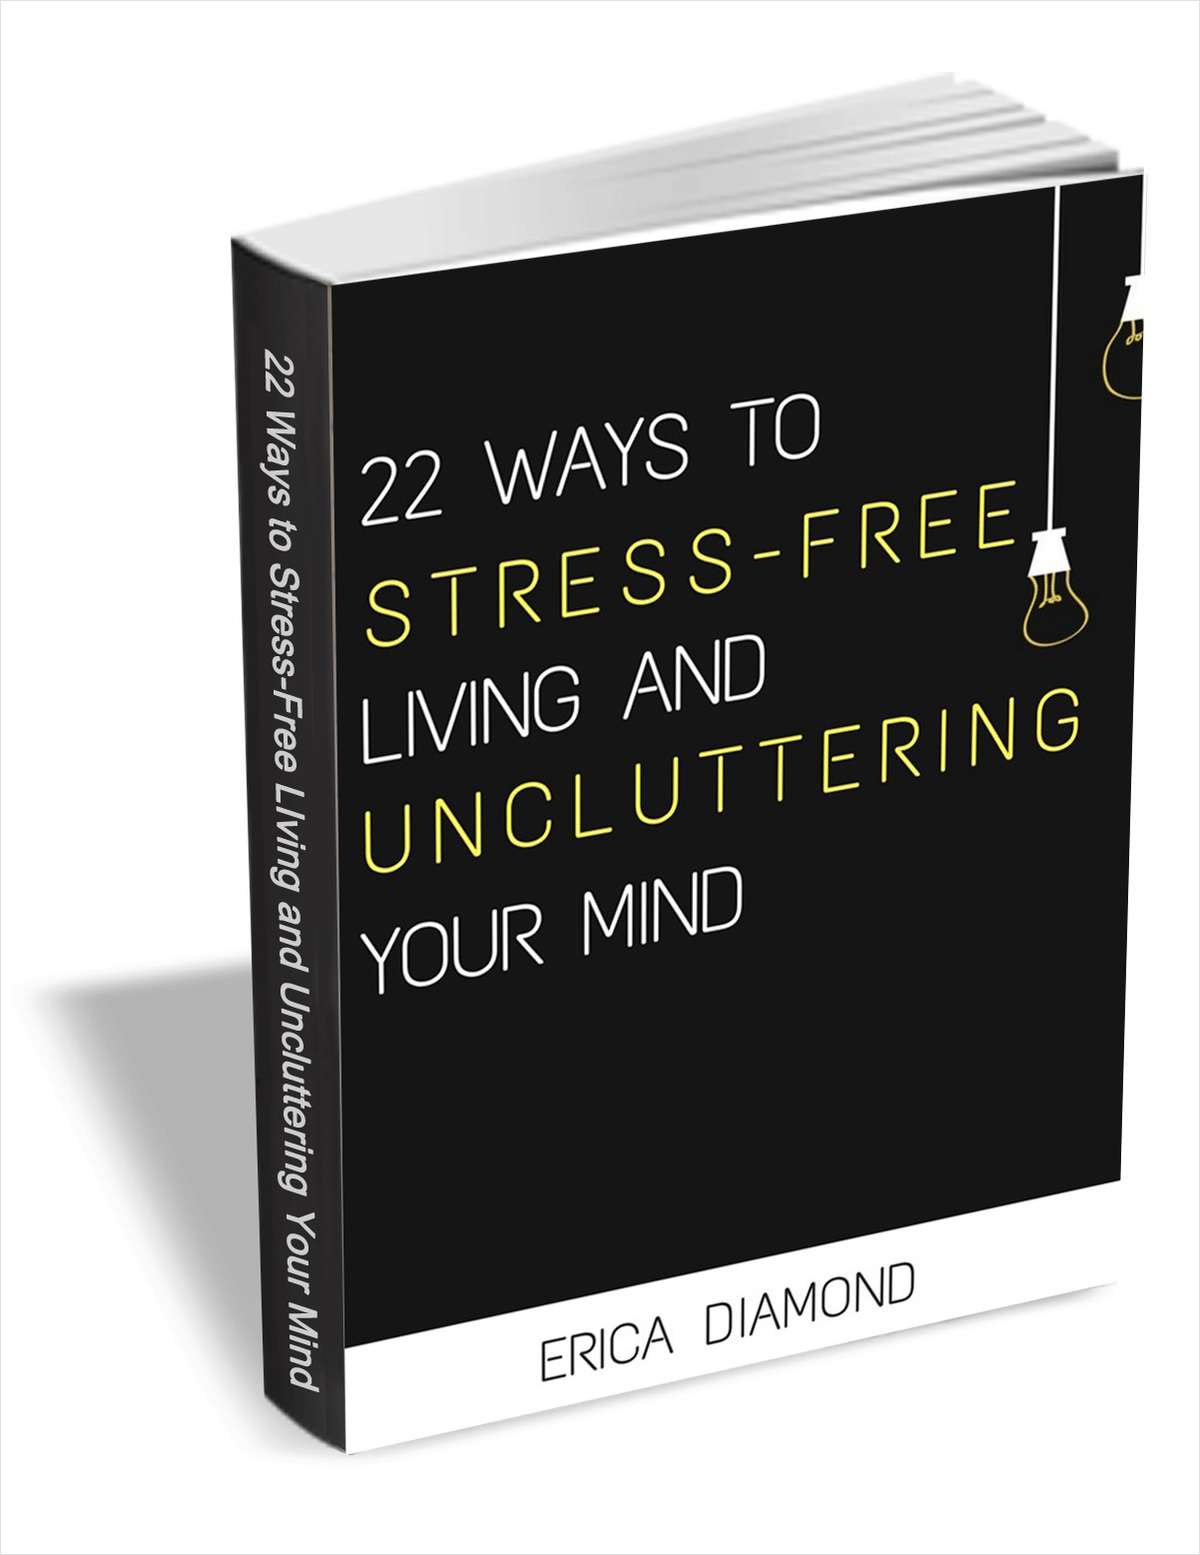 22 Ways to Stress-Free Living and Uncluttering Your Mind